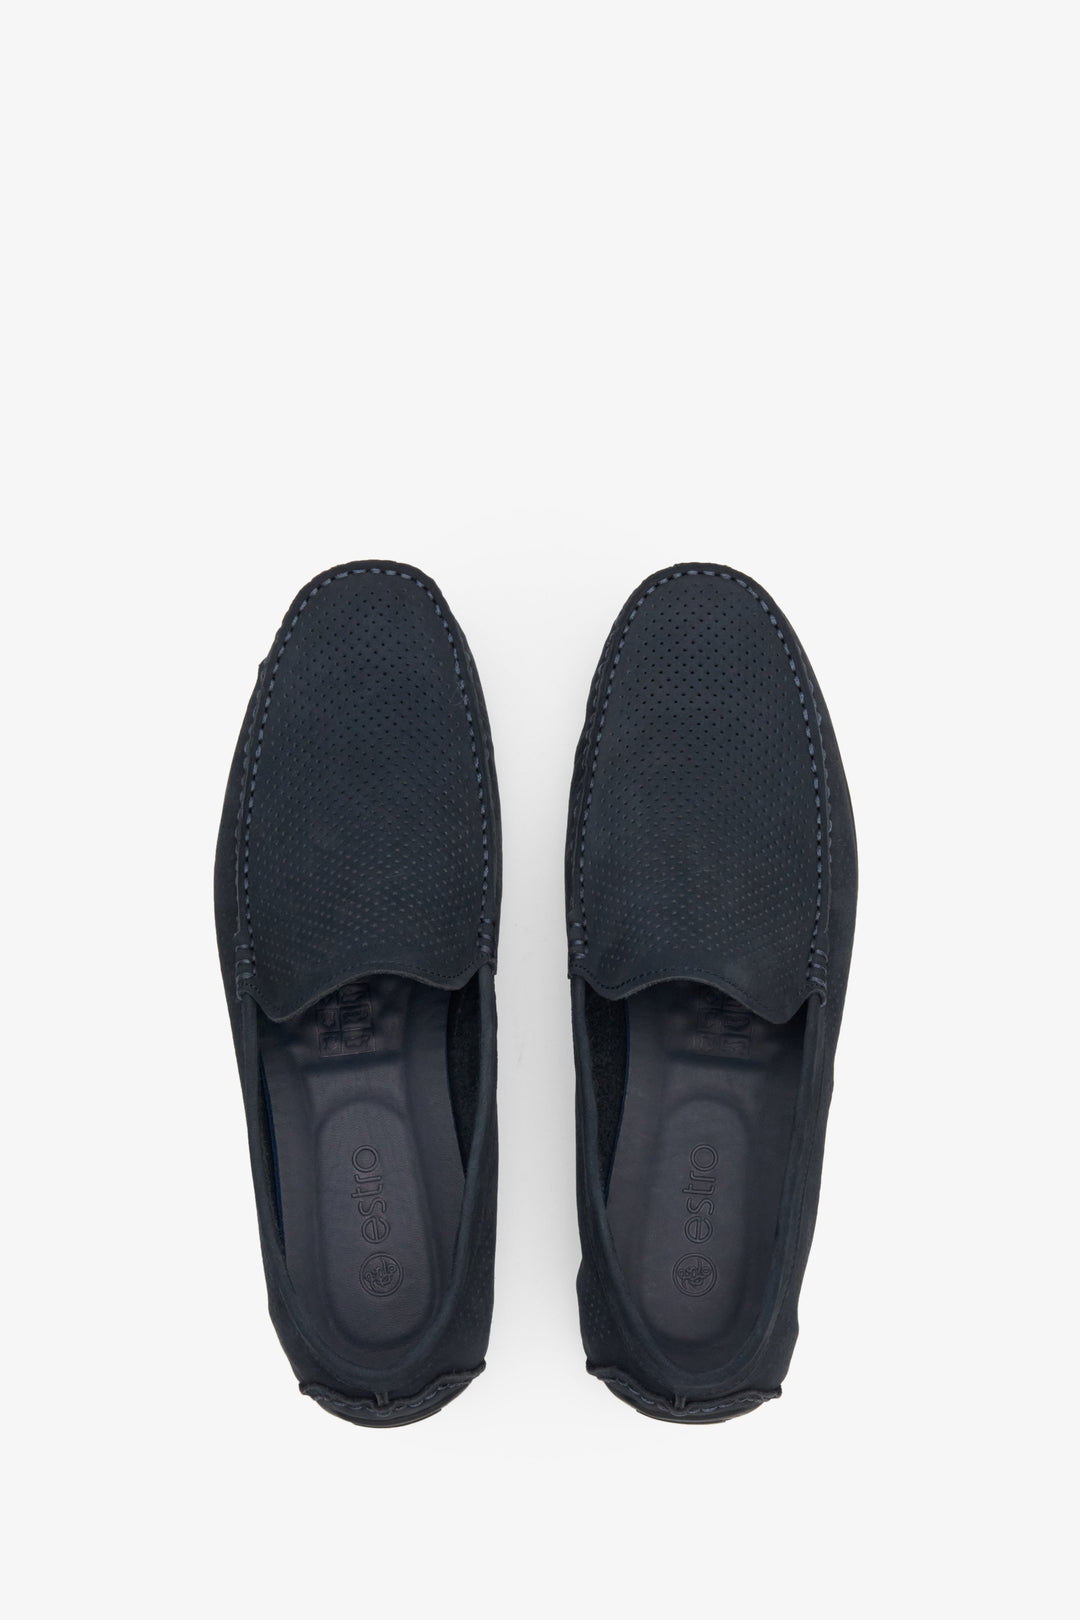 Navy blue nubuck men's loafers for fall - top view shoe presentation.